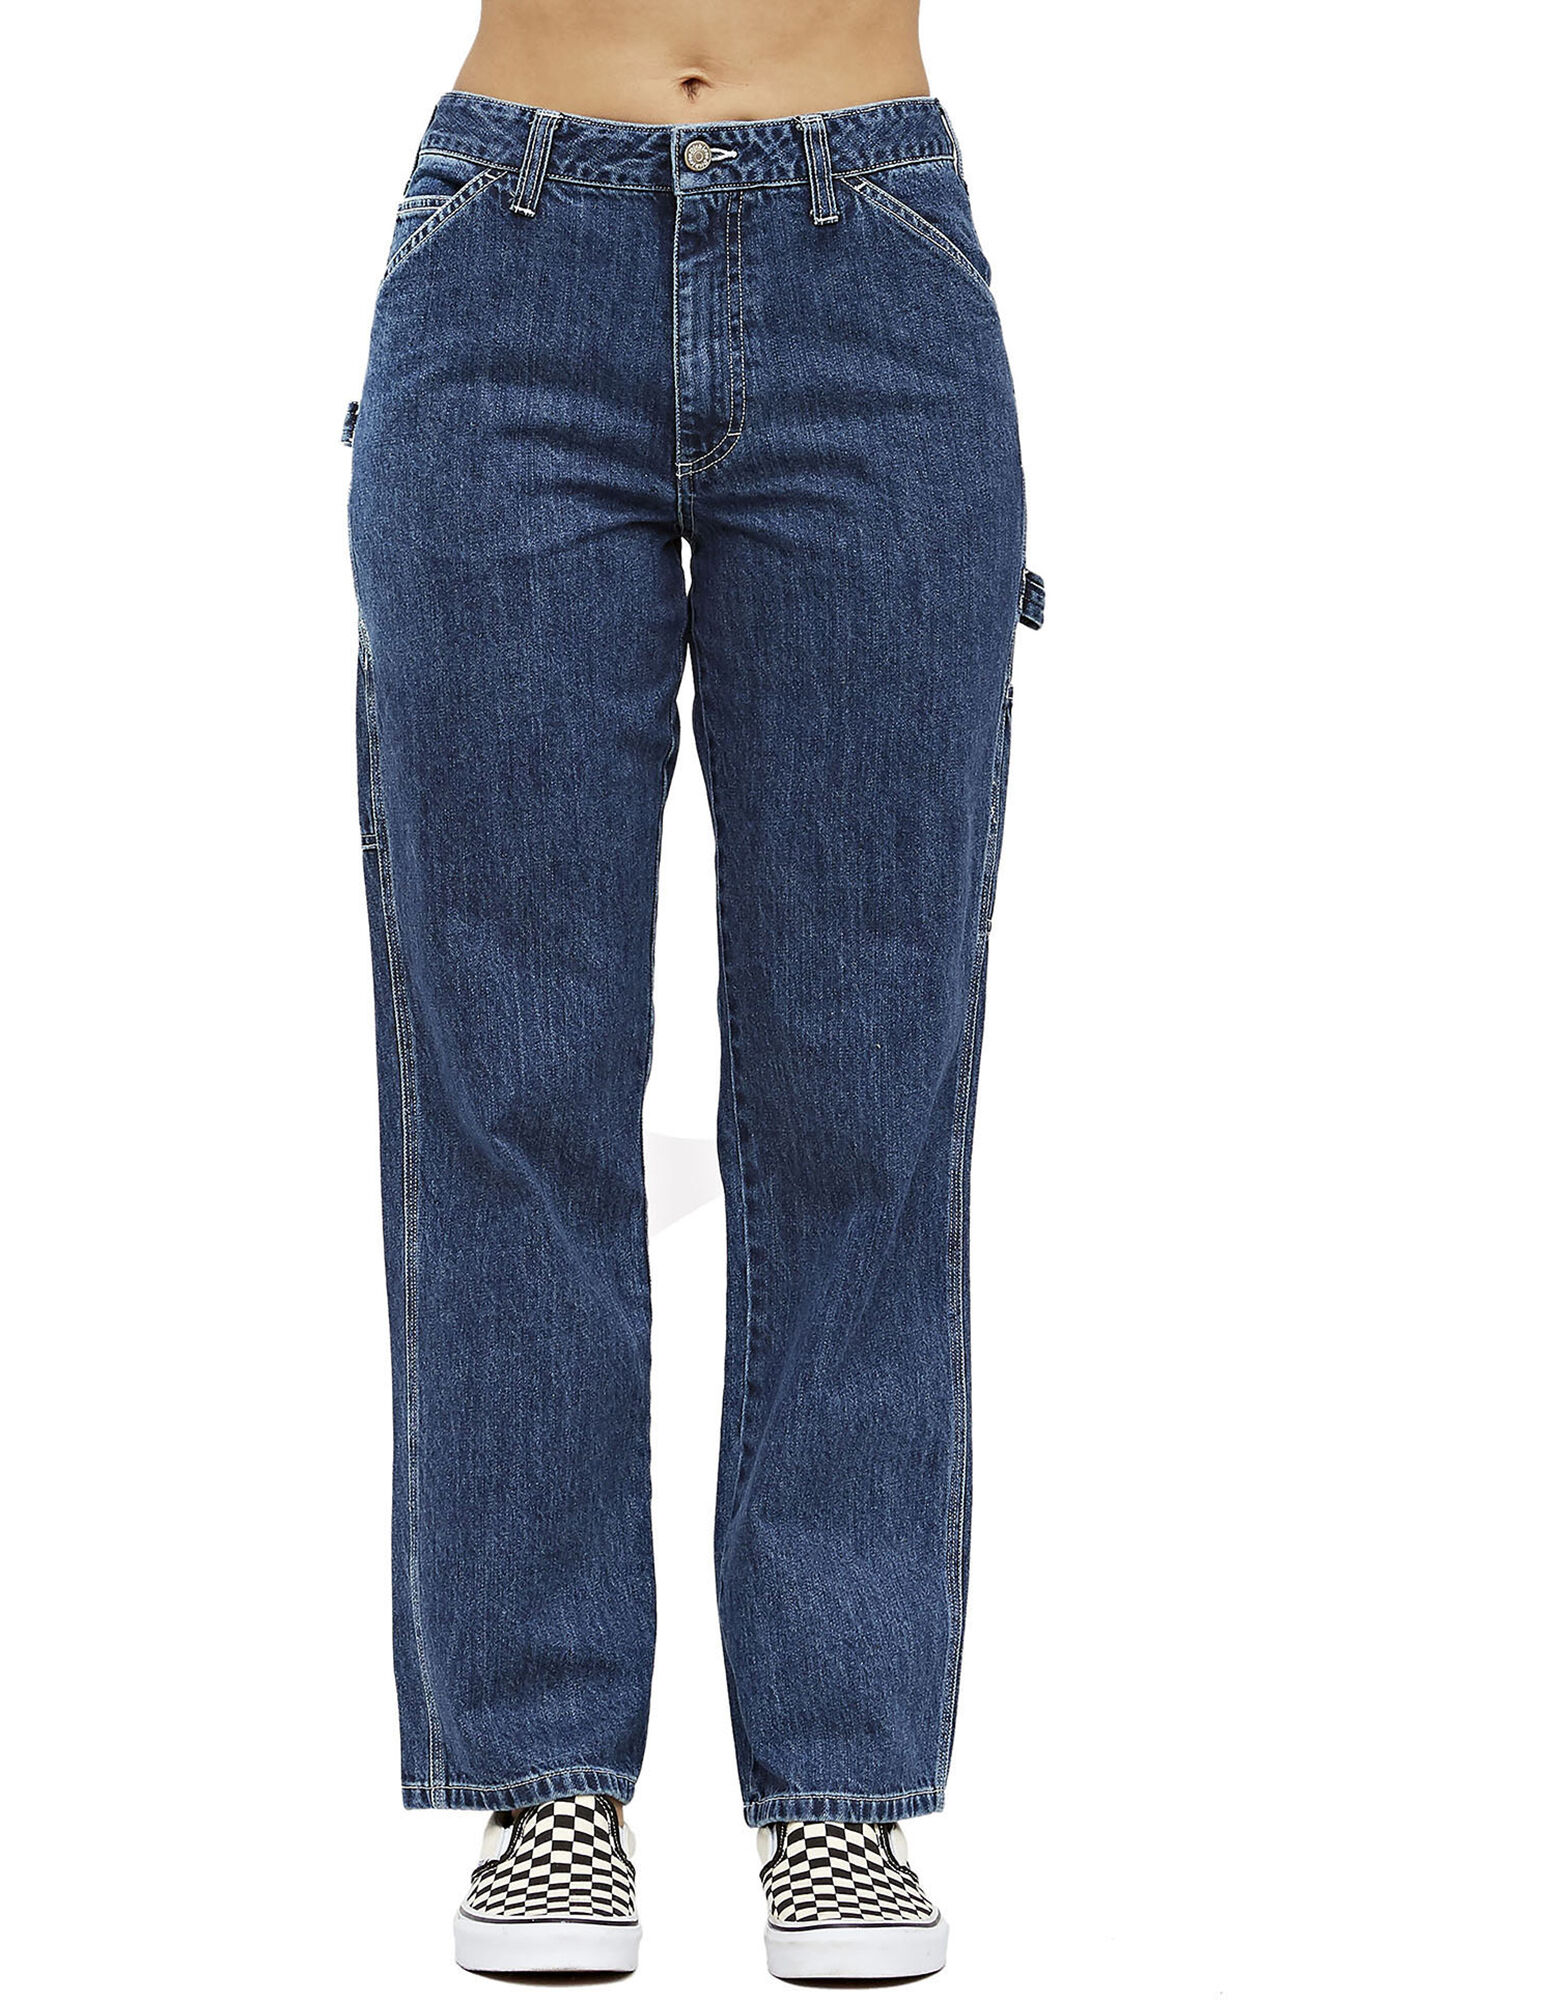 women's colored jeans relaxed fit